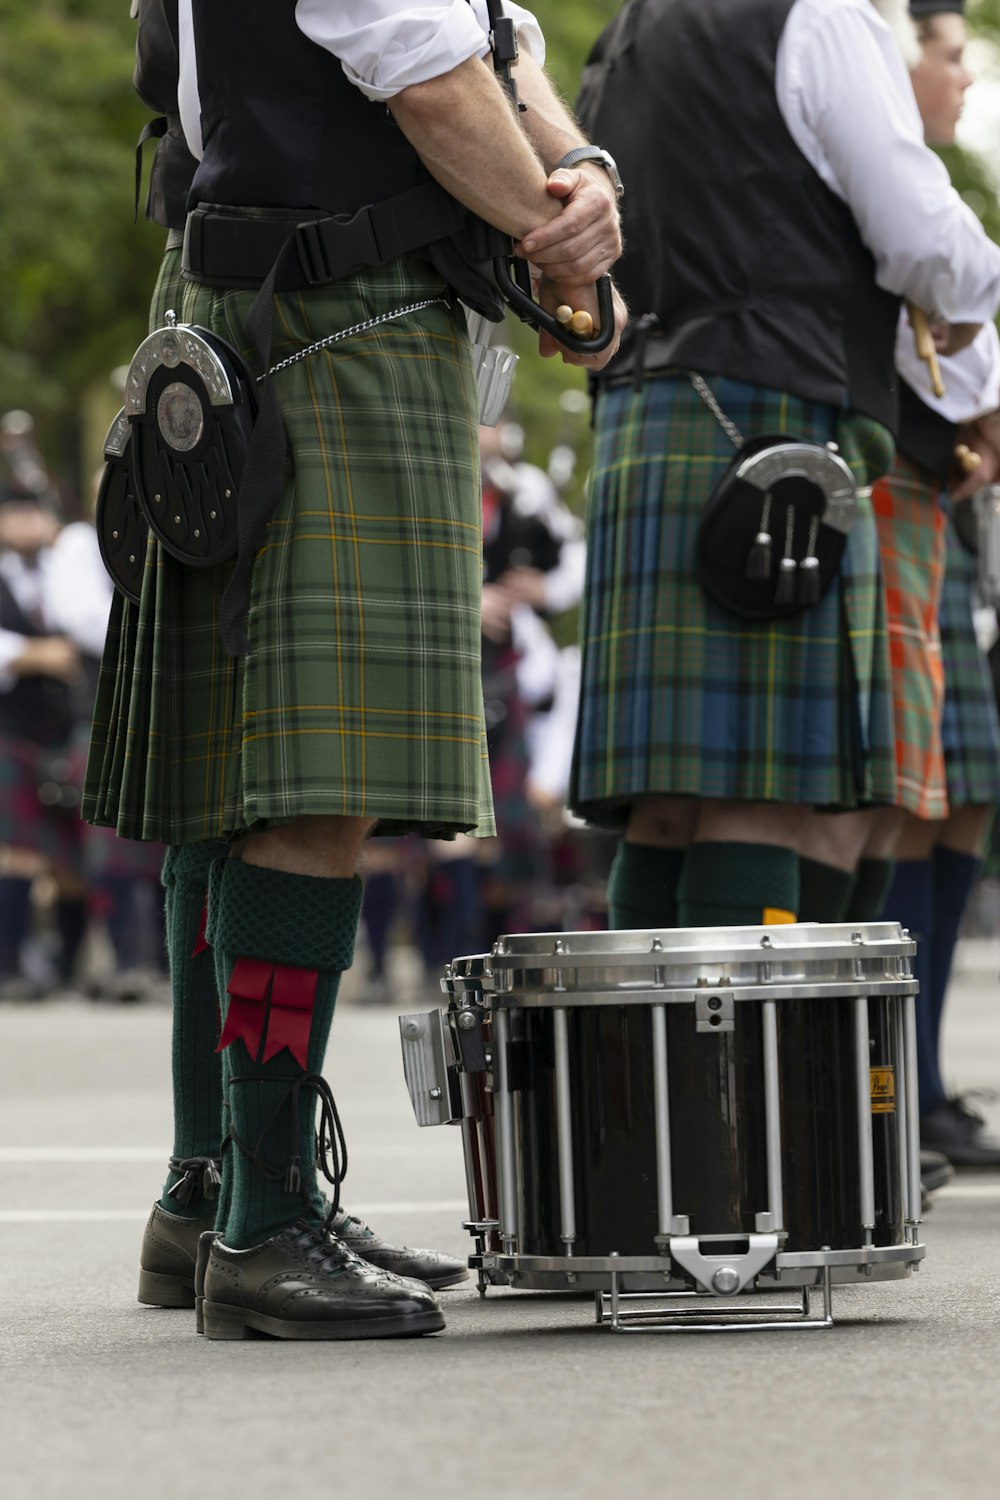 a group of men in kilts standing next to a drum